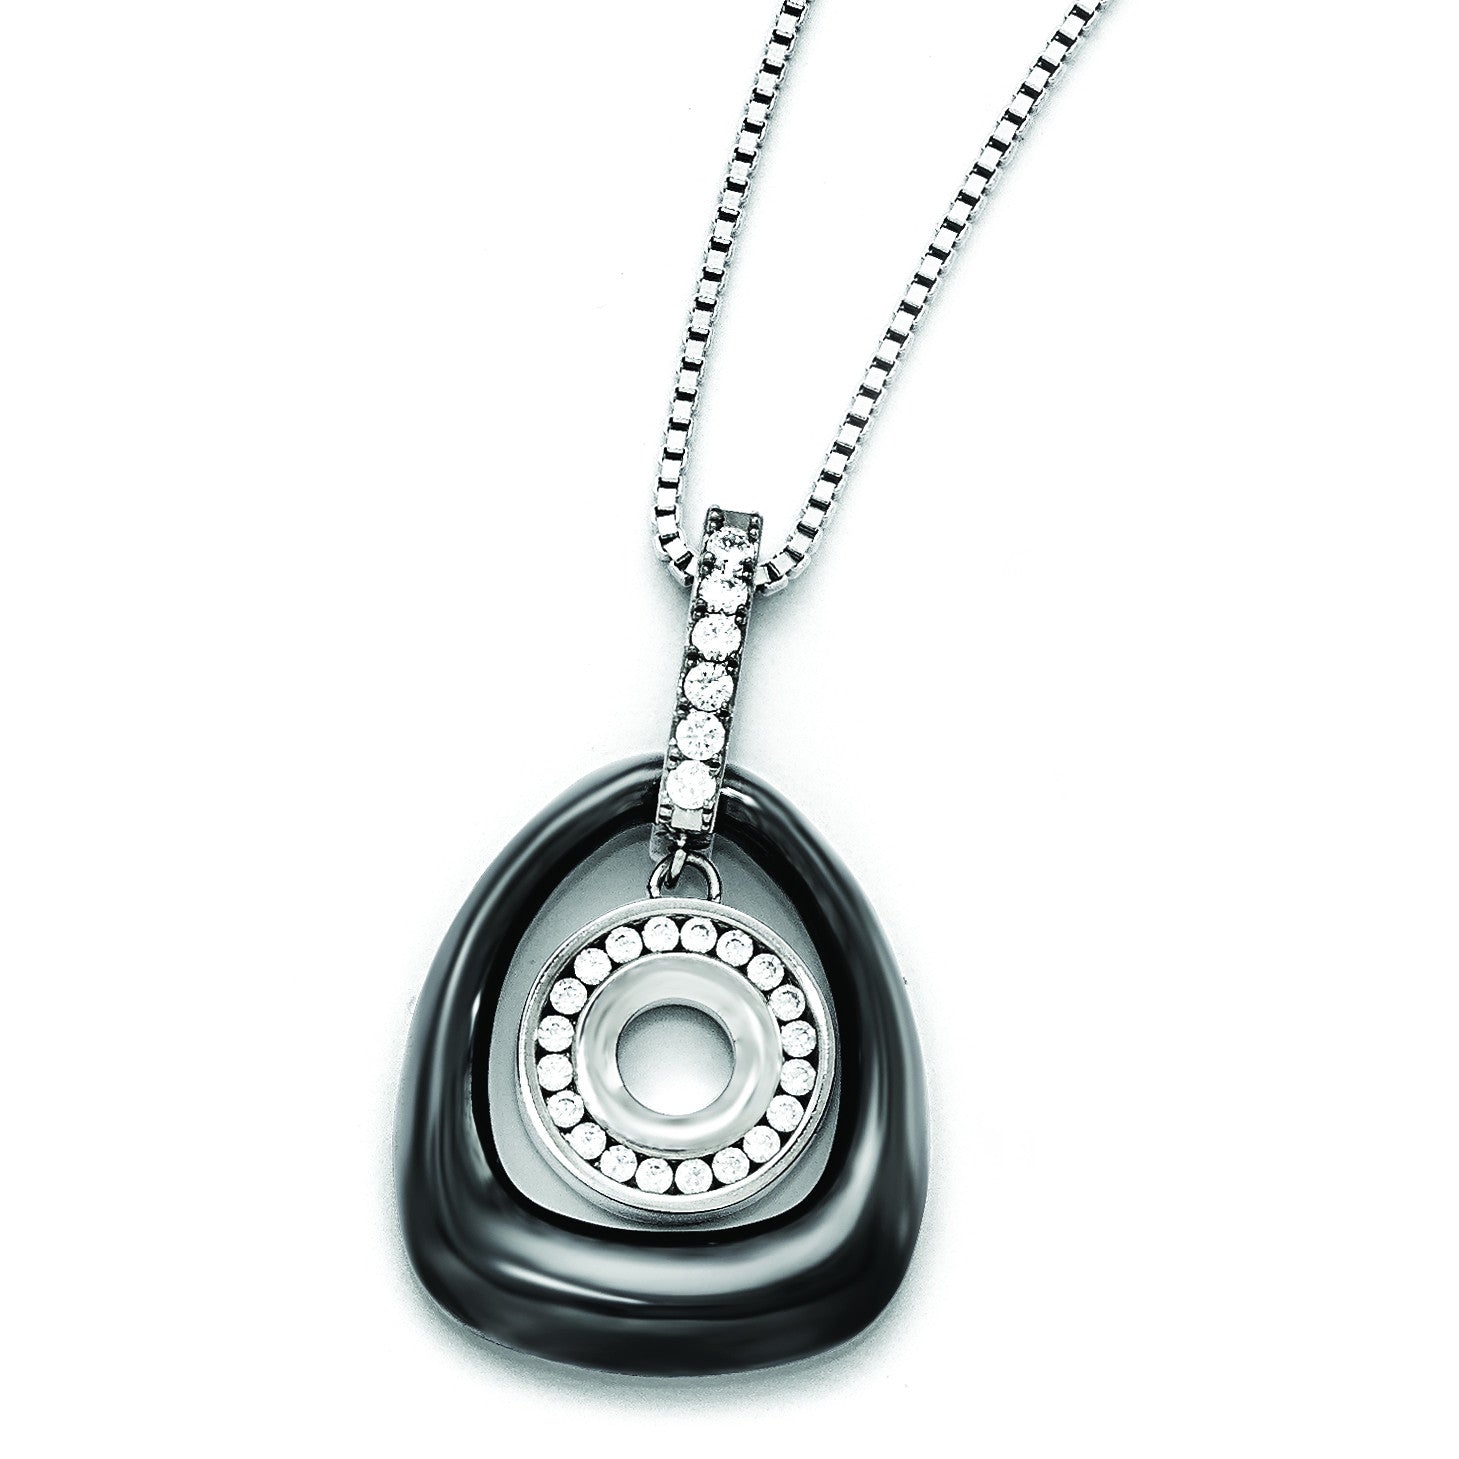 Polished Ceramic with CZ Titanium Pendant on Steel Necklace TBN1